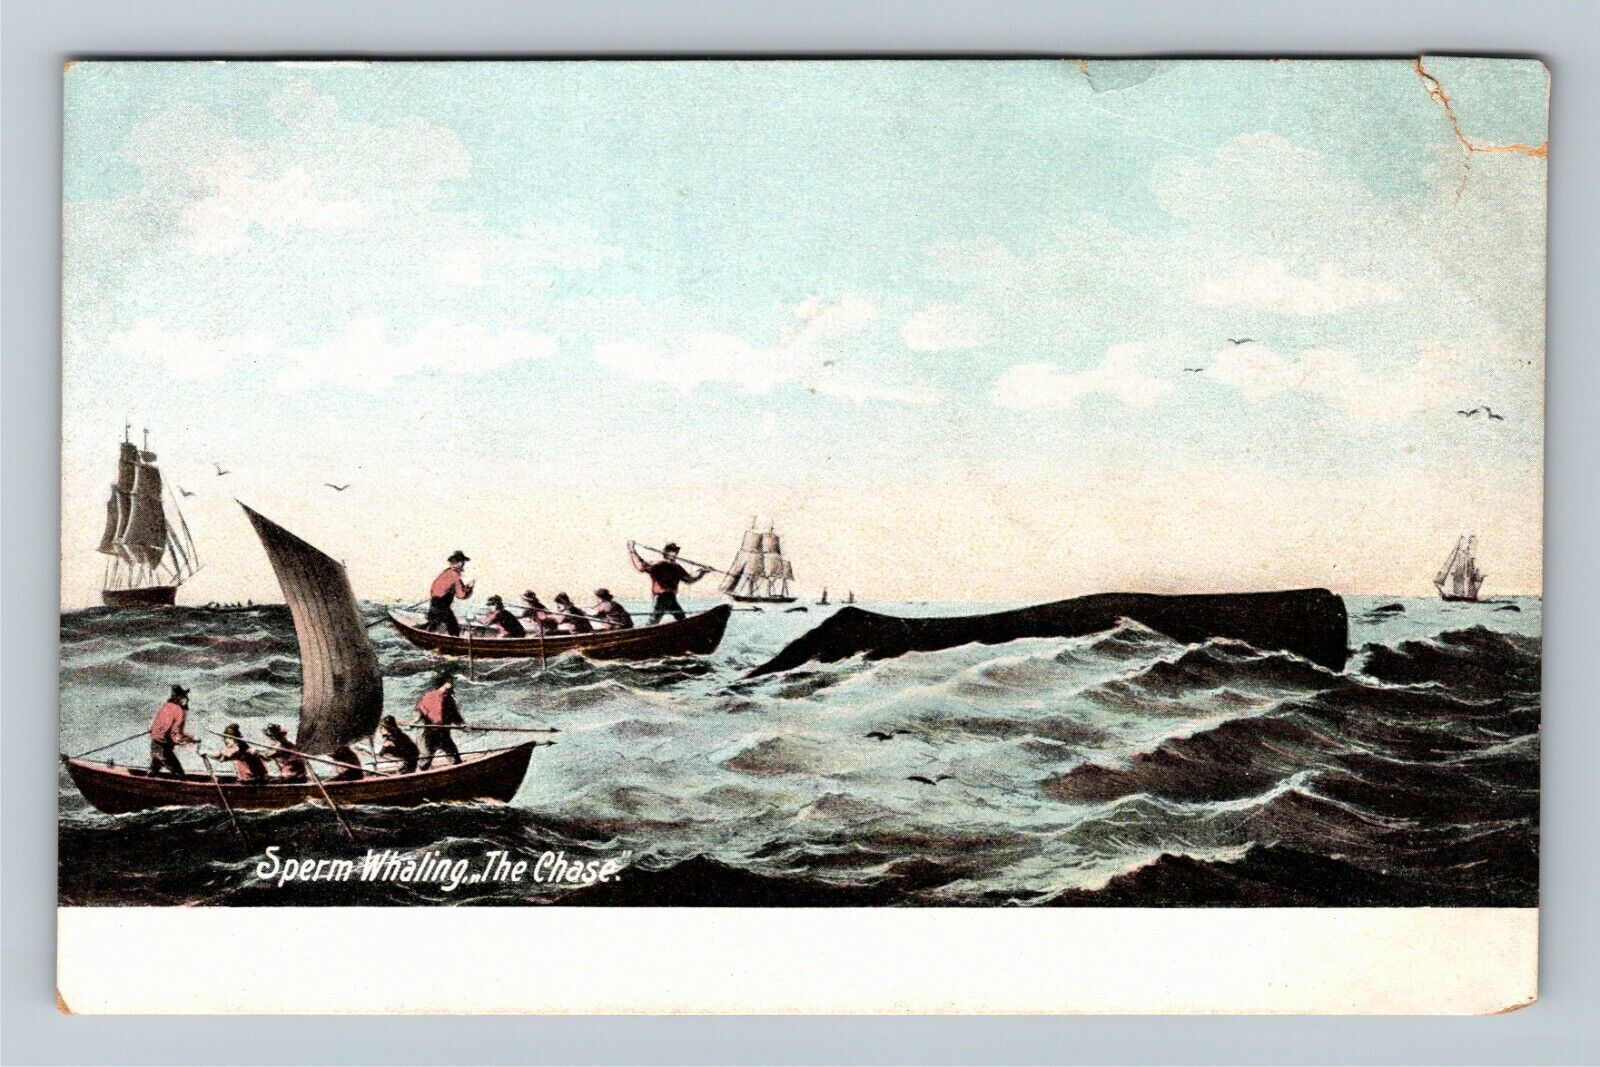 The Chase During Sperm Whaling, Vintage Postcard